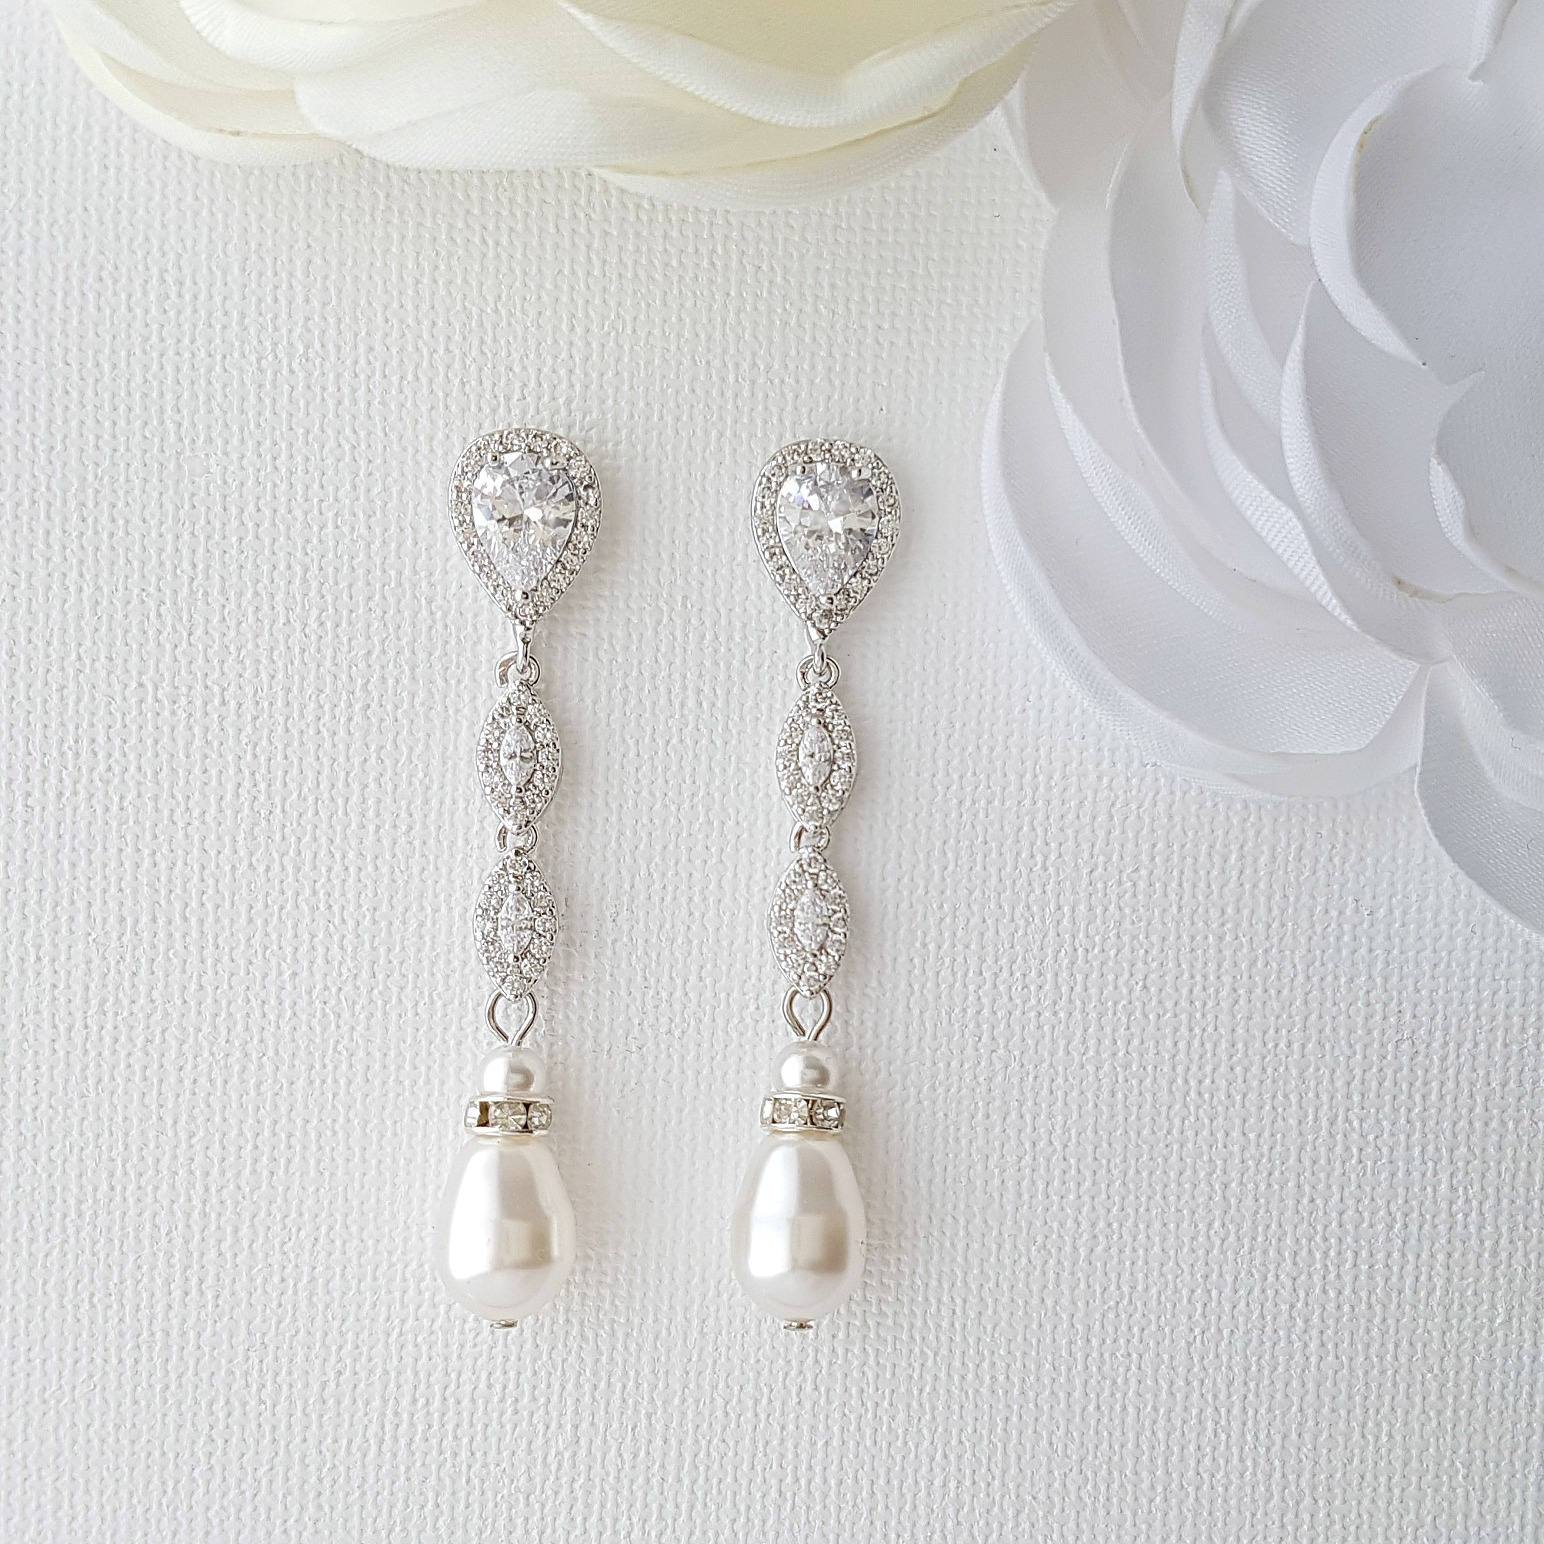 Silver Pearl Earrings For Wedding and Evening Wear